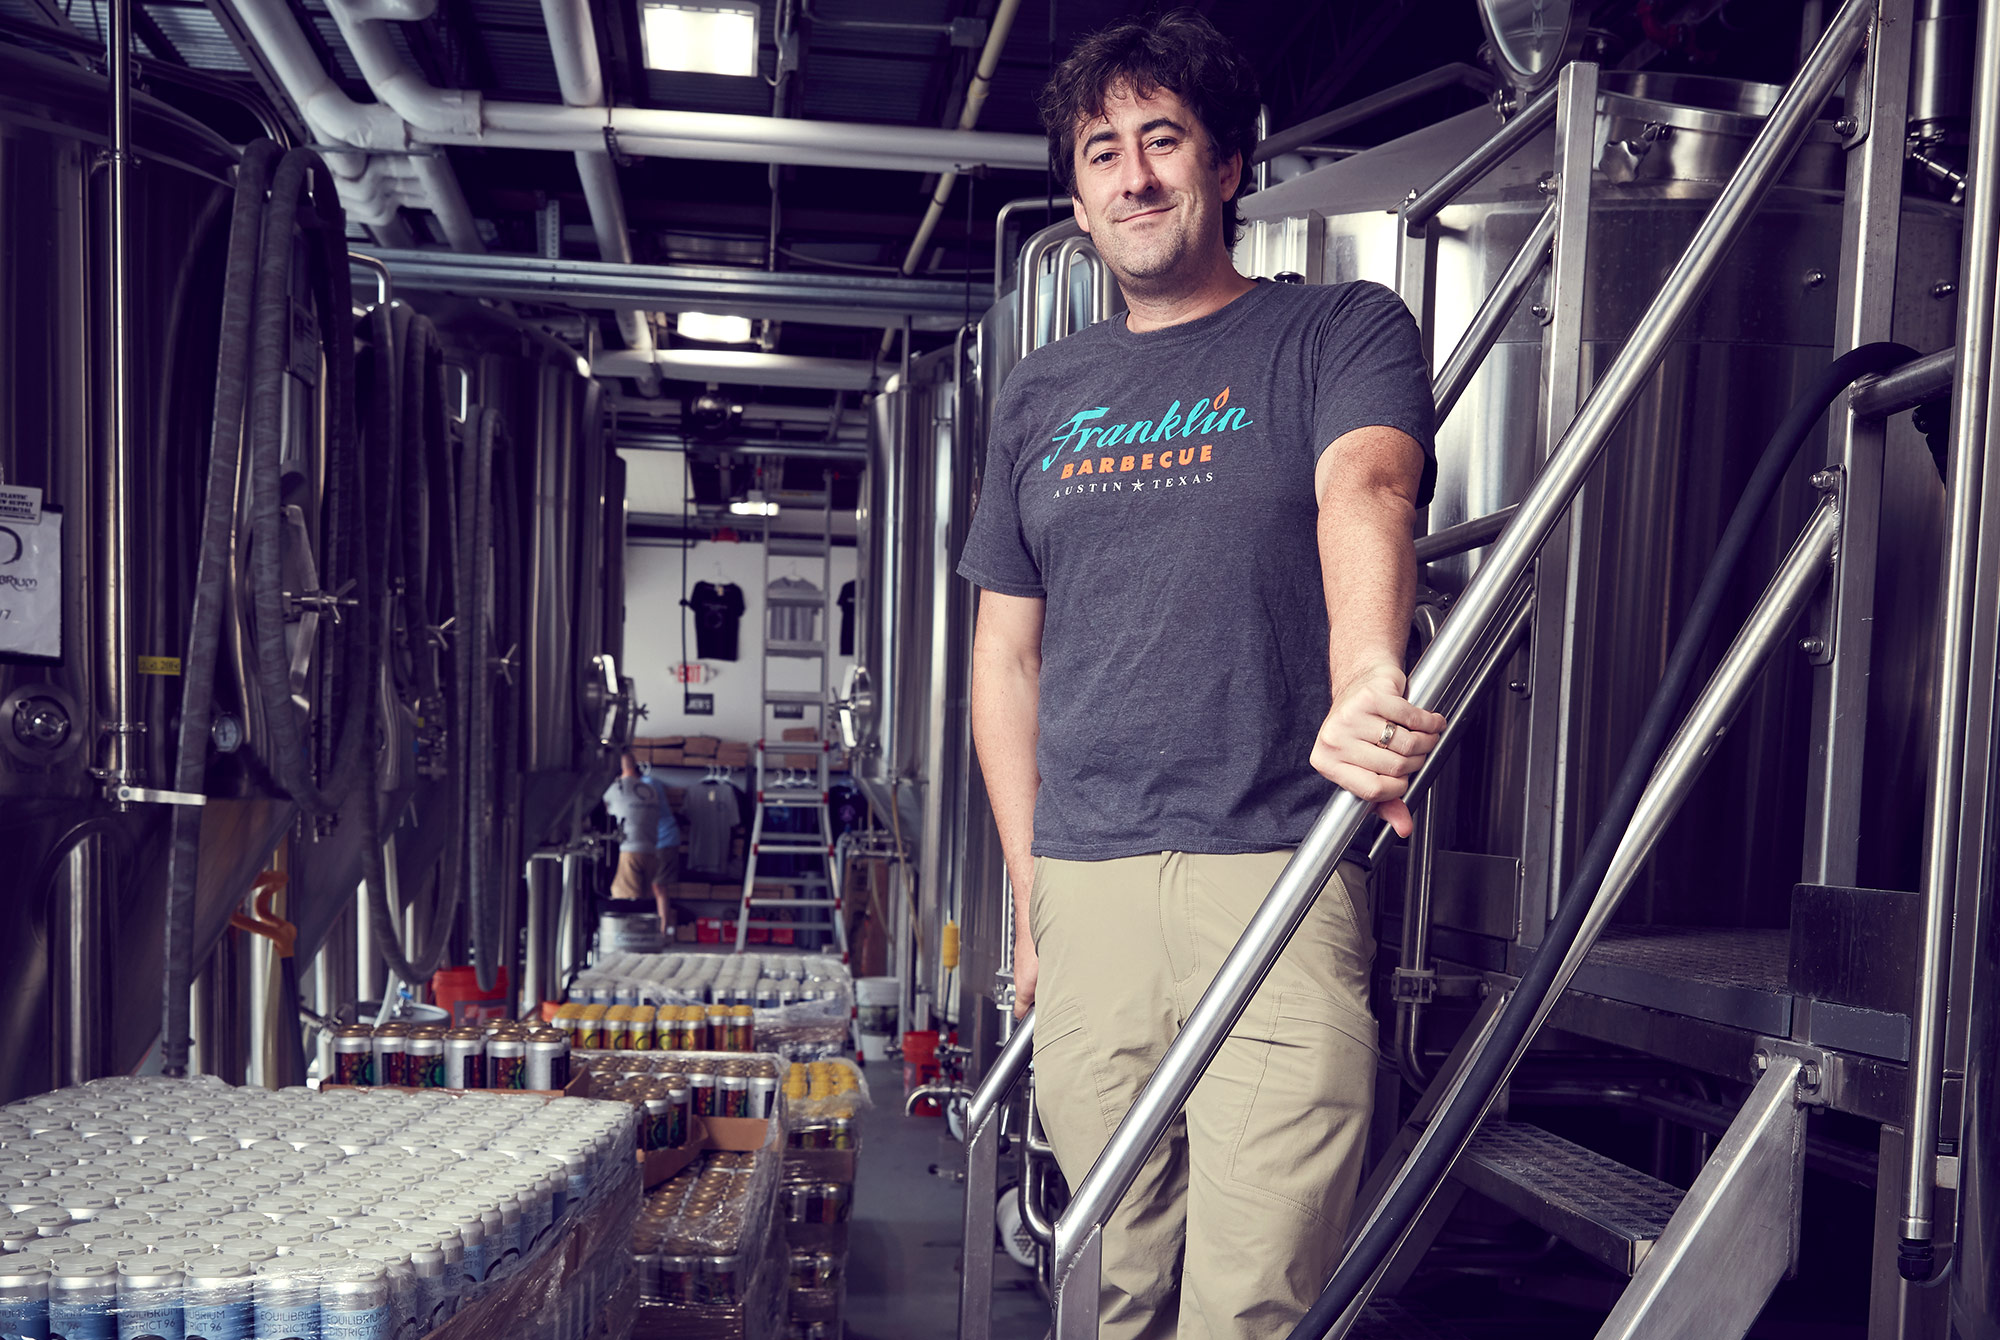 How Equilibrium Takes a Scientific Approach to Hazy IPAs